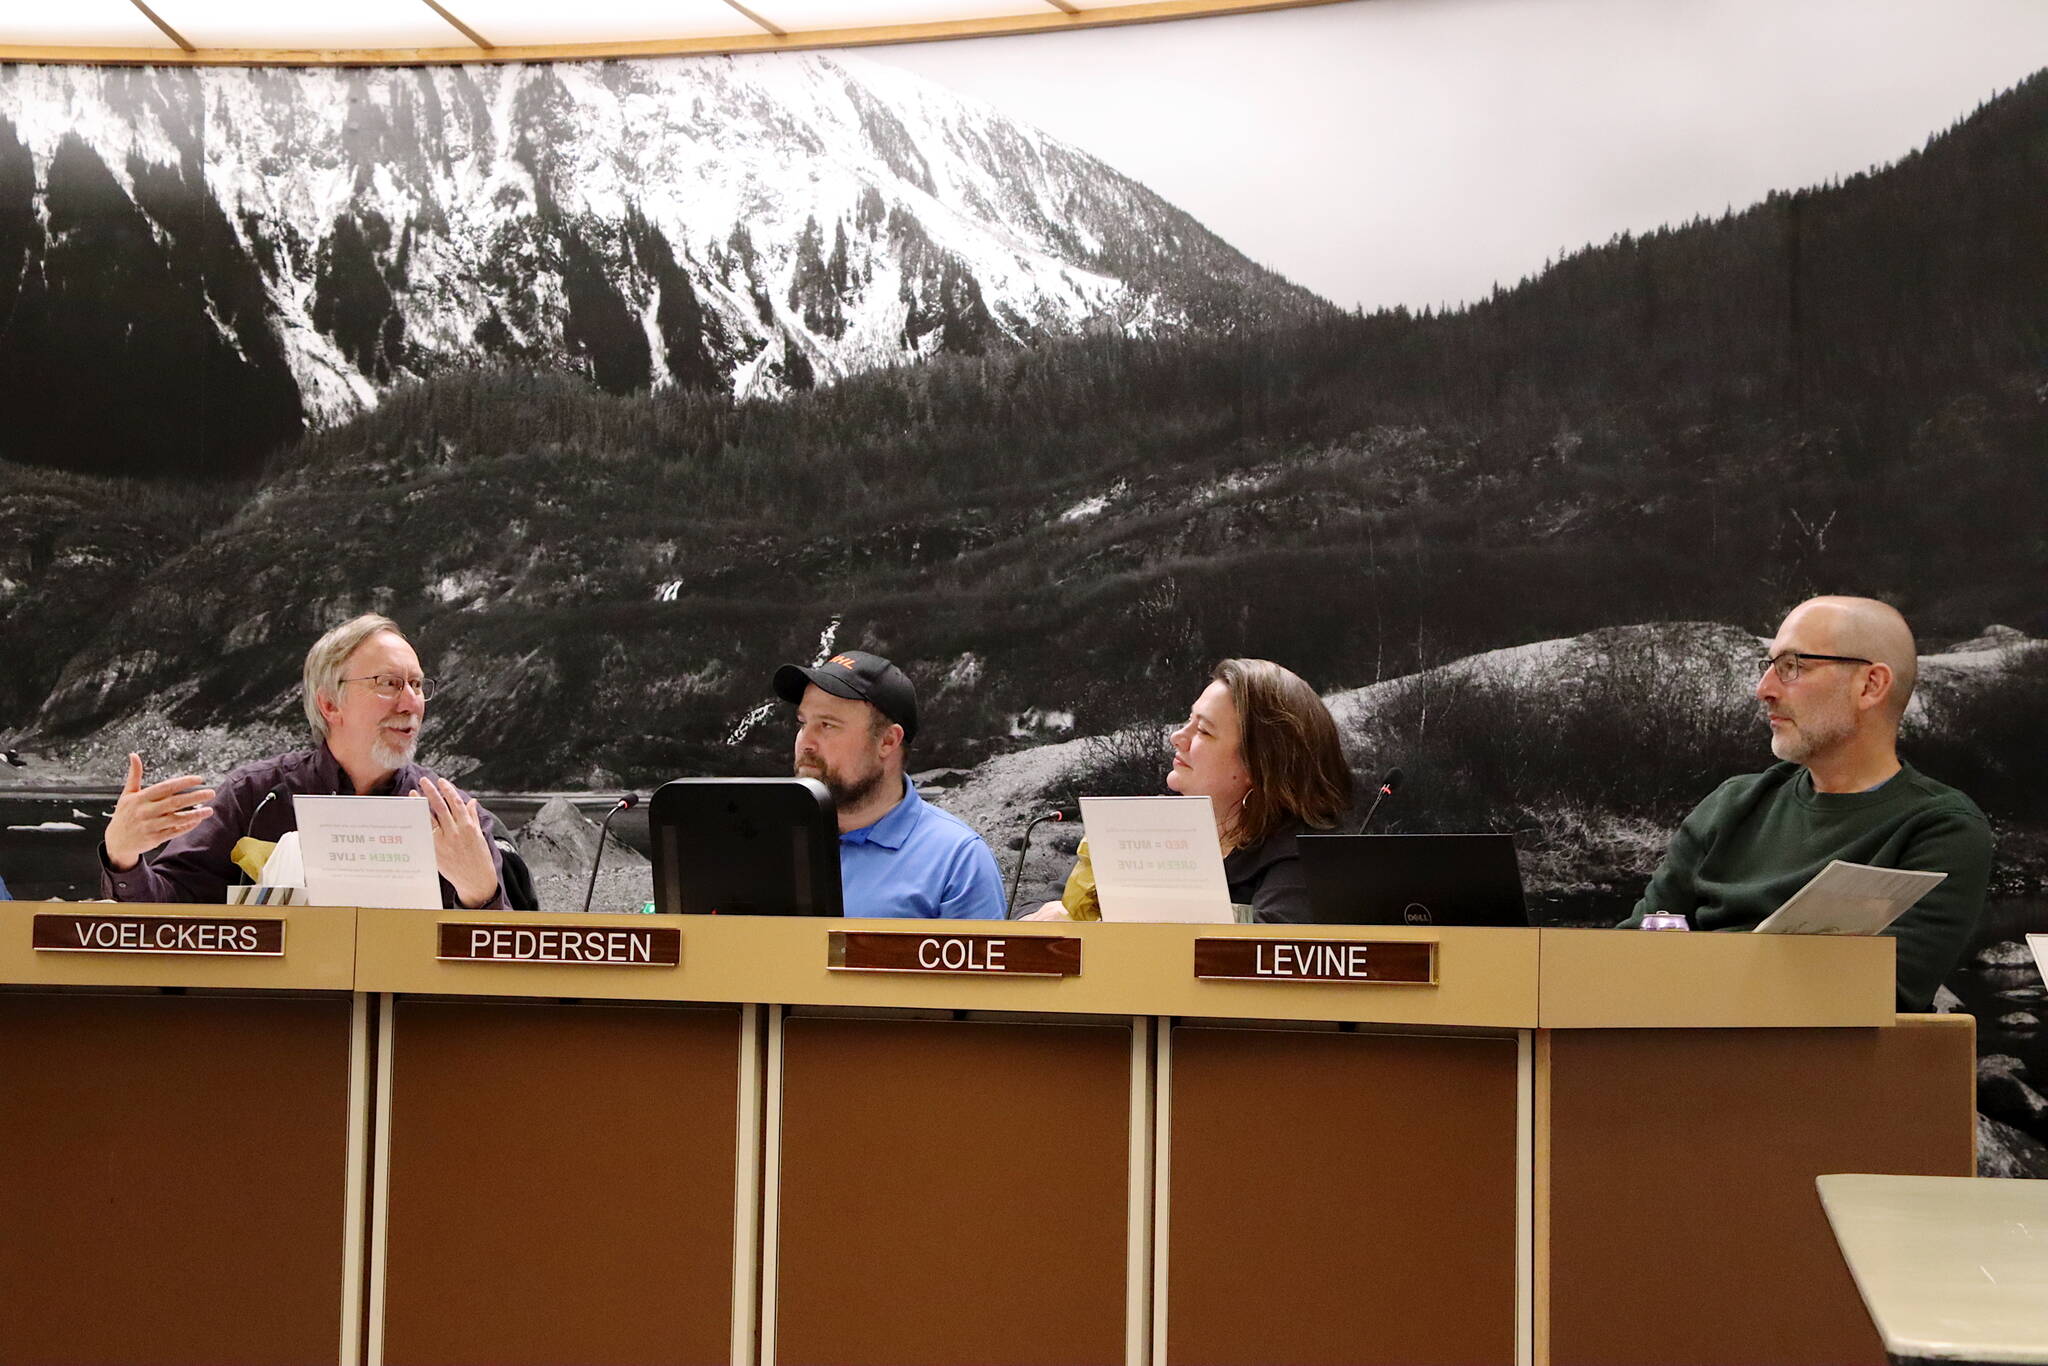 Paul Voelckers (left) offers farewell remarks along with Michael LeVine (right) during their last Juneau Planning Commission meeting Tuesday night. Listening to their remarks are commission members Mandy Cole — who was appointed to the board Thursday — and Erik Pedersen. (Mark Sabbatini / Juneau Empire)